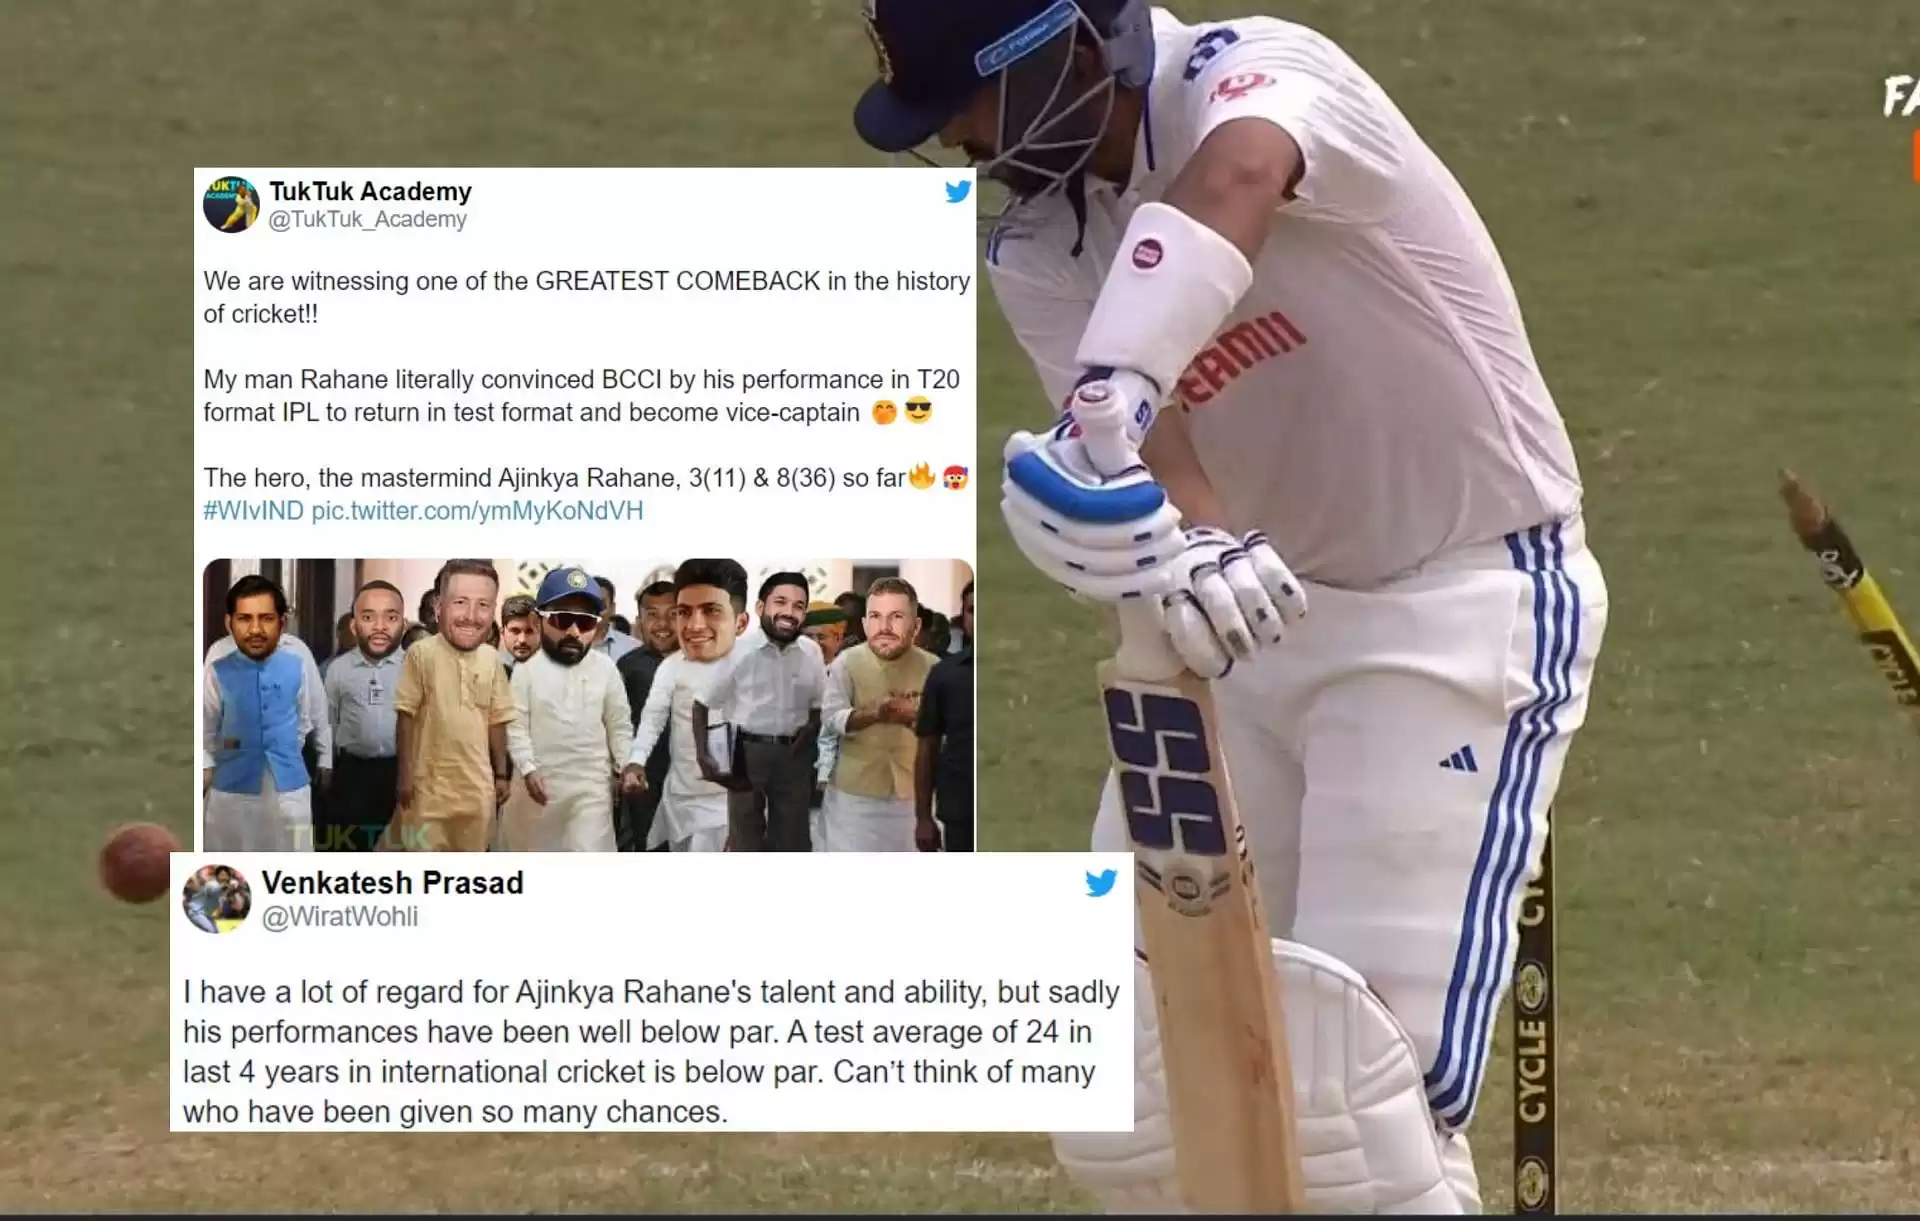 Fans express disappointment as Ajinkya Rahane underperforms in the 2nd India vs West Indies Test, leading to concerns about CSK's performance without Dhoni.